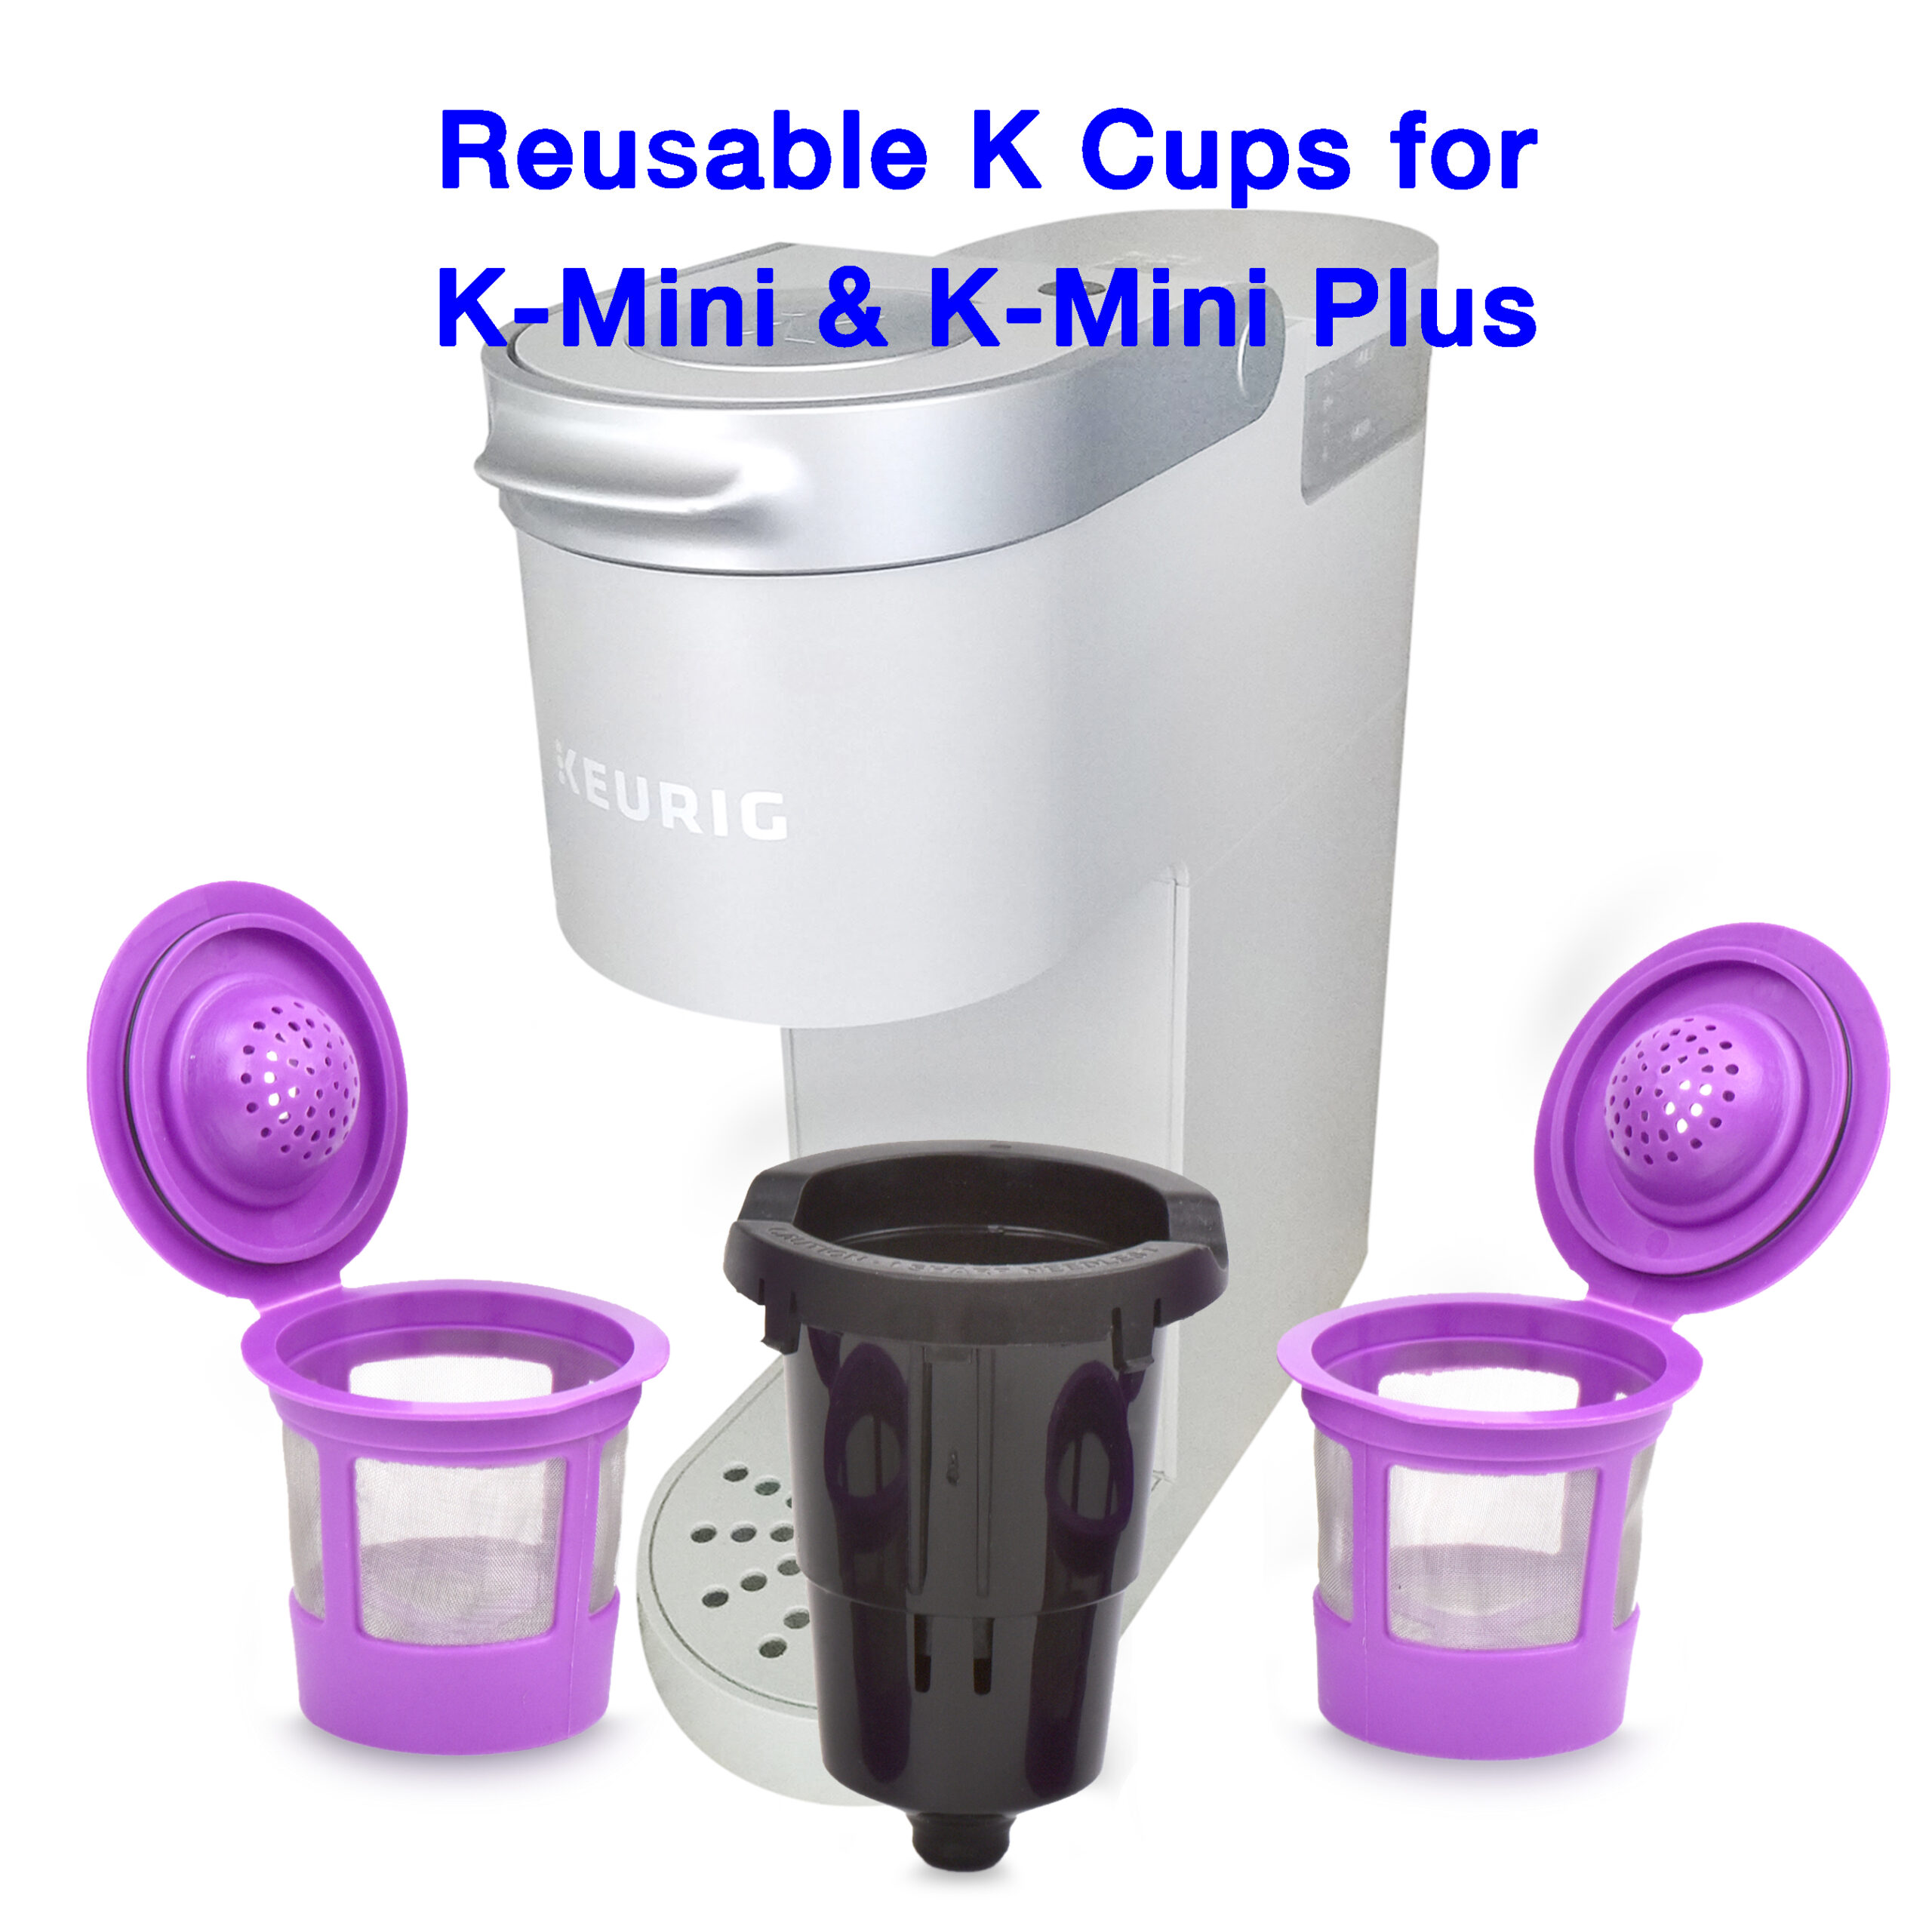 Keurig K-Mini Coffee Maker Single-Serve K-Cup (Poppy Red) Bundle with  3-Month Brewer Maintenance Kit and Double Wall Stainless Steel Tumbler (3  Items)